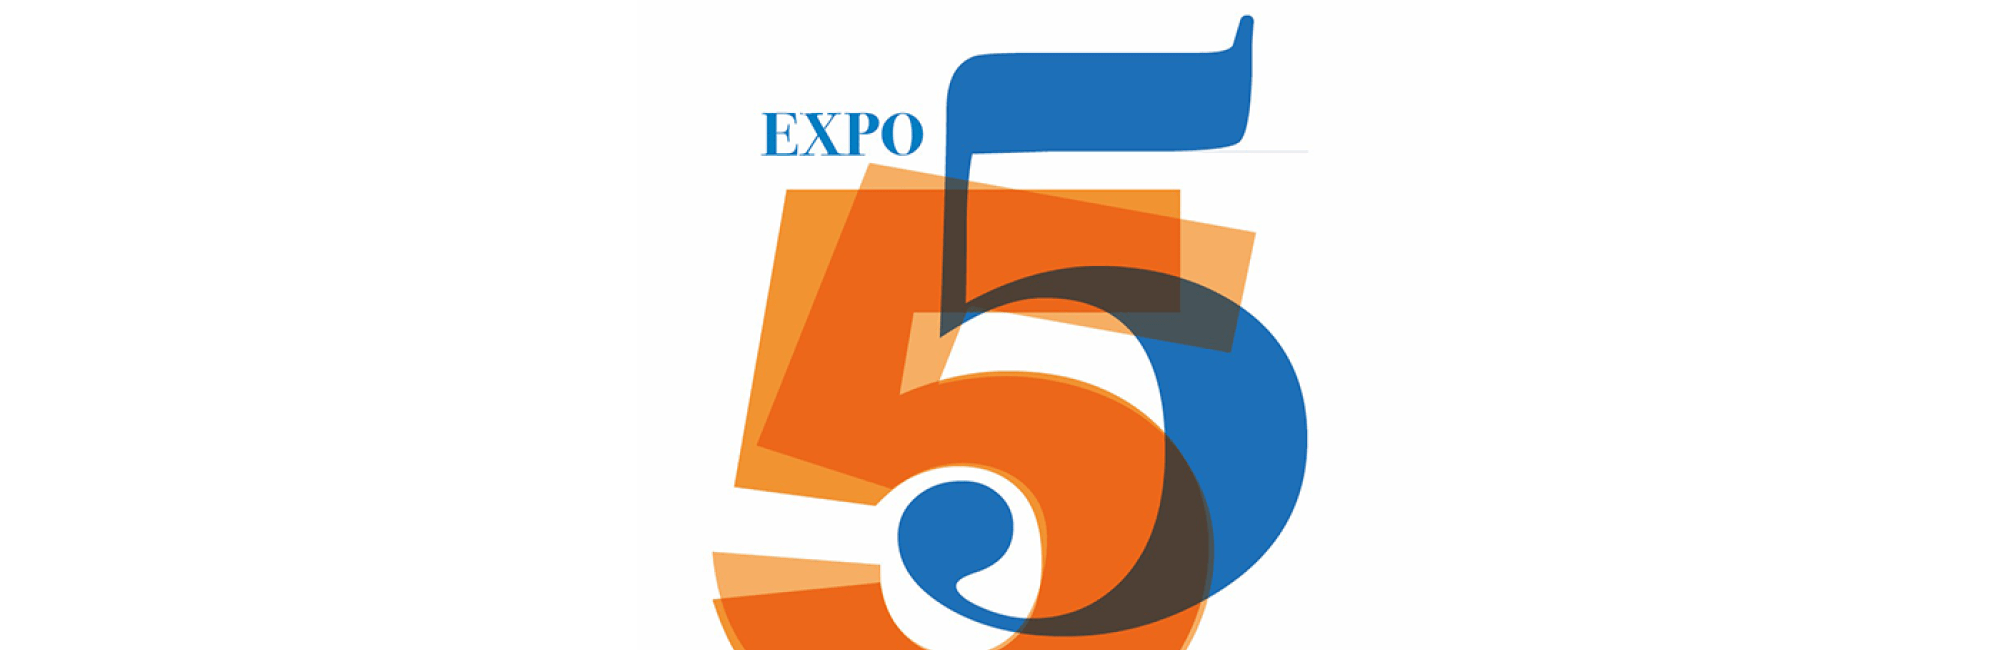 banner expo 55